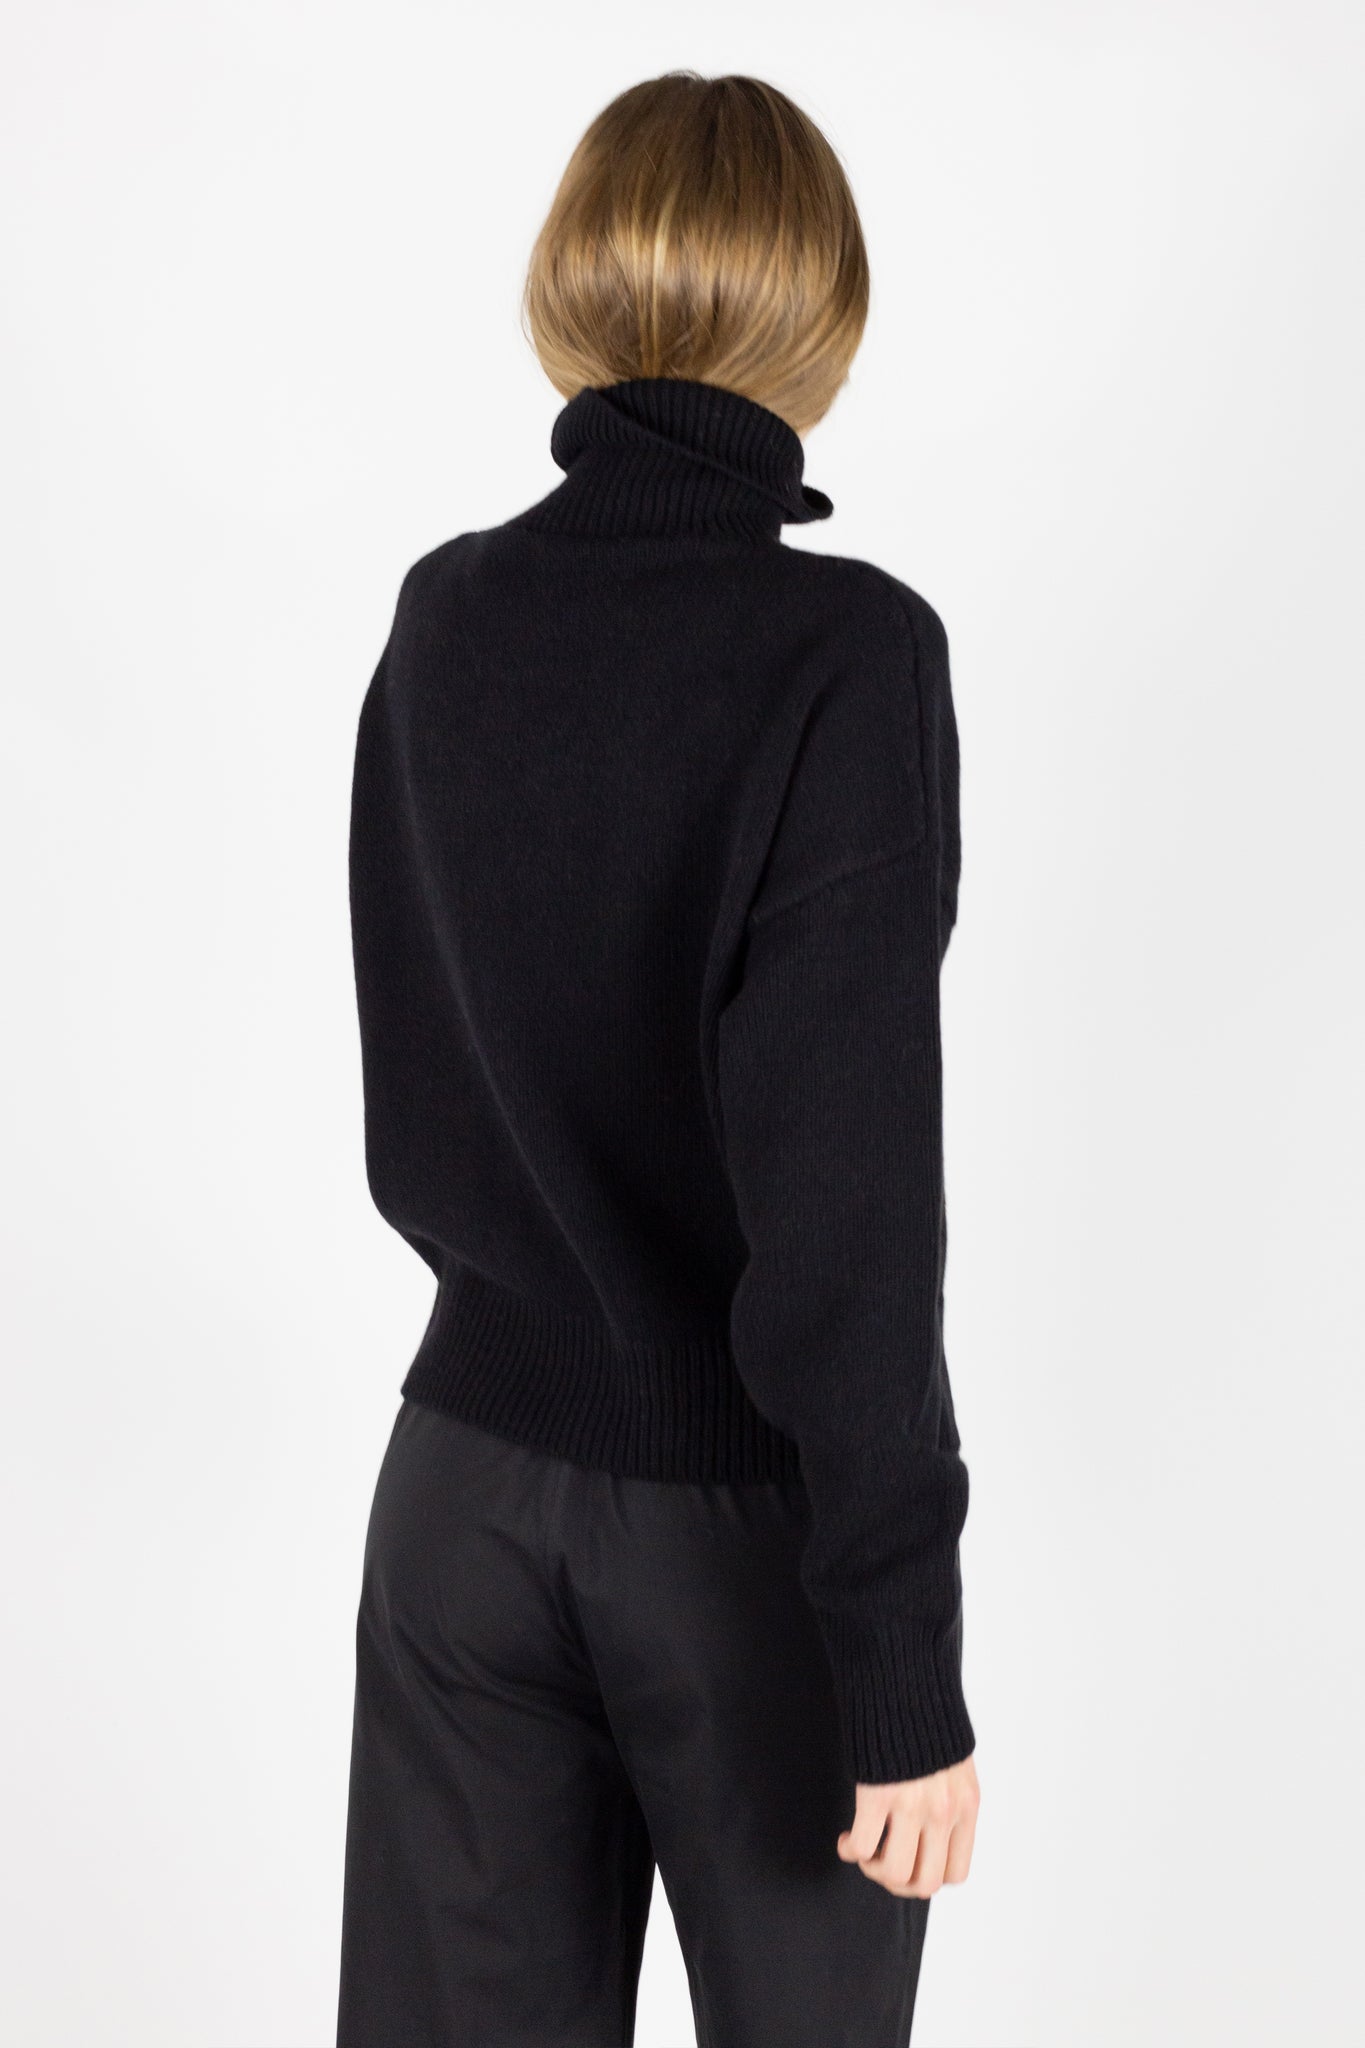 Cashmere black roll neck sweater. Knitted